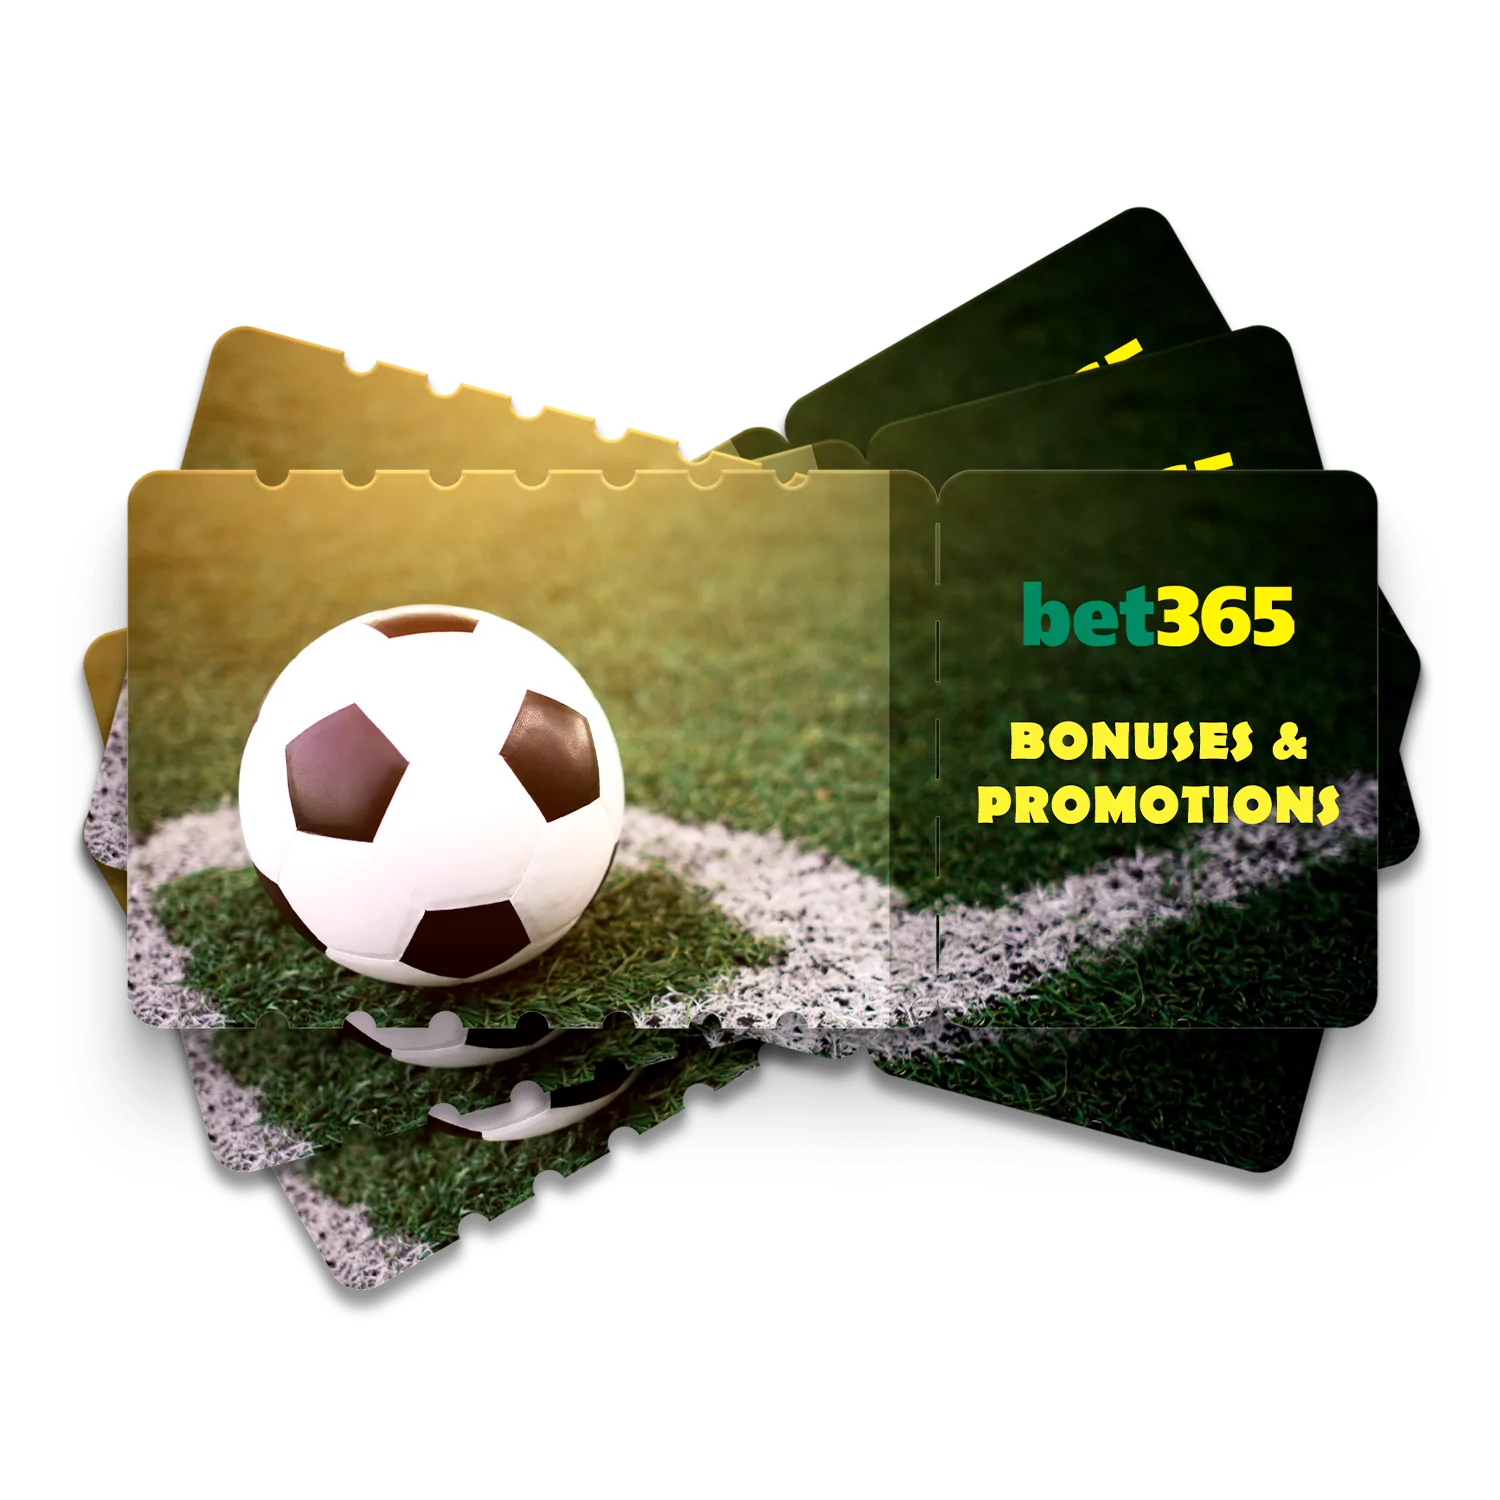 Learn what bonuses and promotions Bet365 offers to its users.